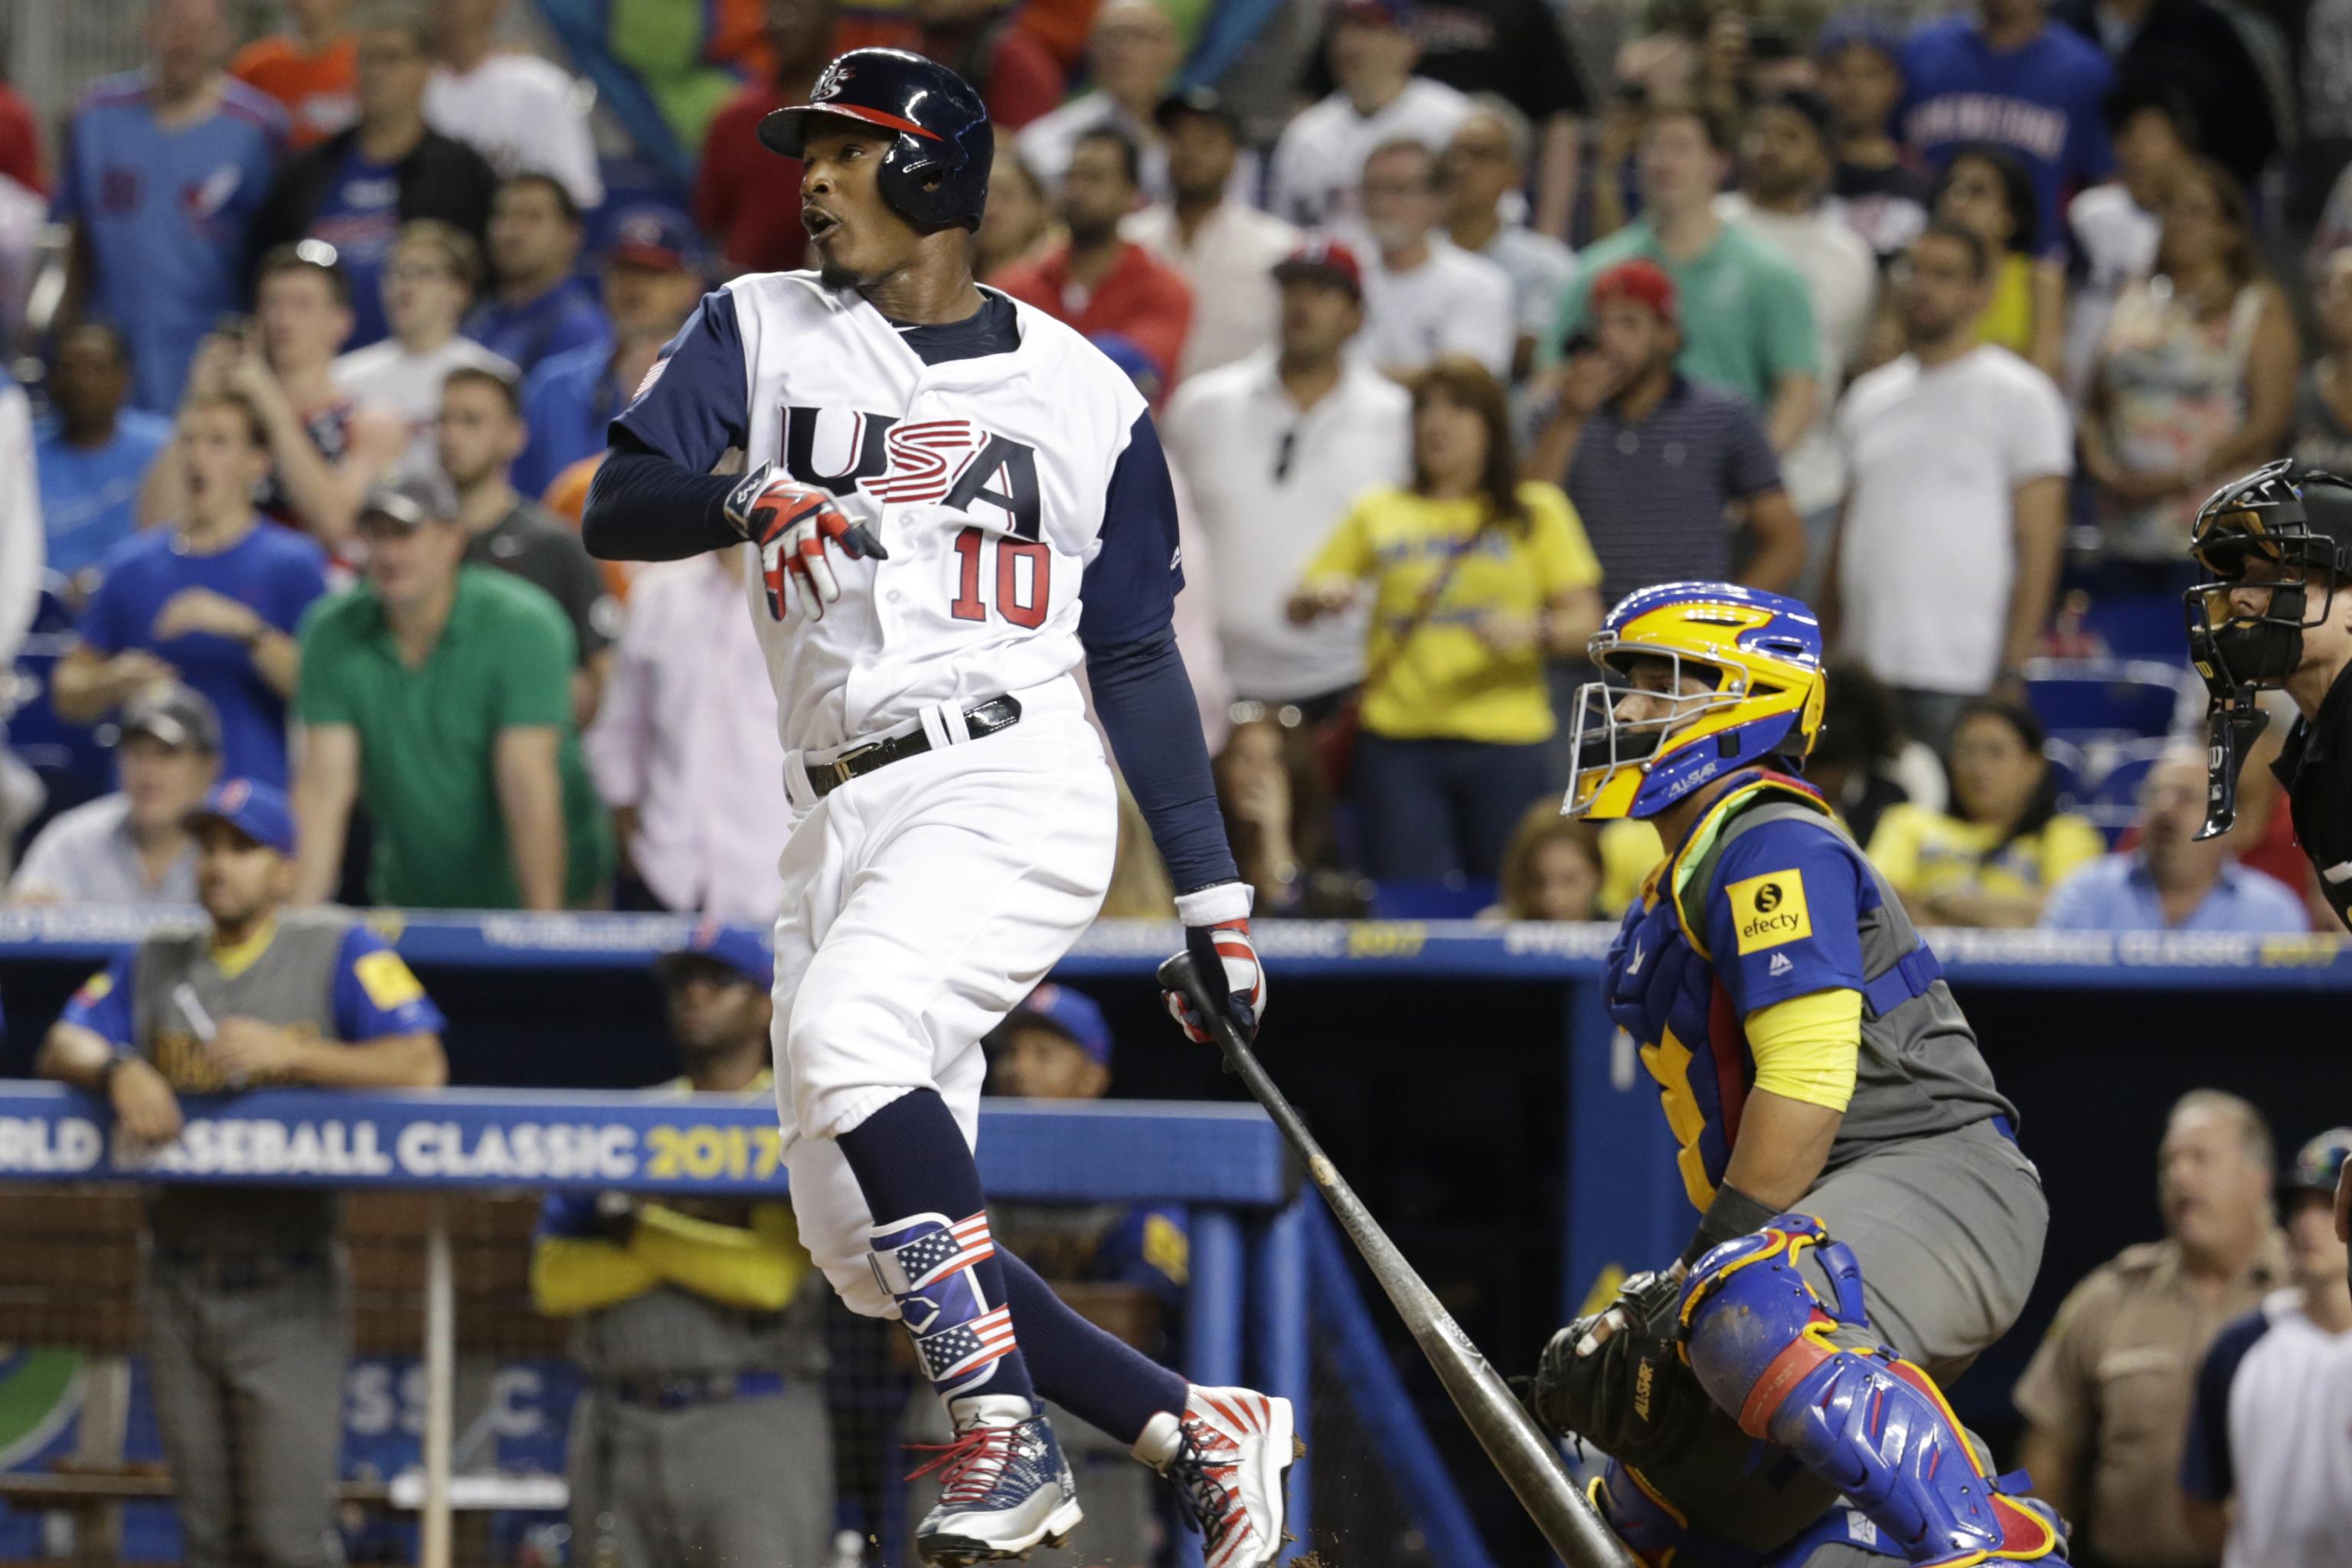 Usa Vs Colombia Score And Reaction From World Baseball Classic 17 Bleacher Report Latest News Videos And Highlights